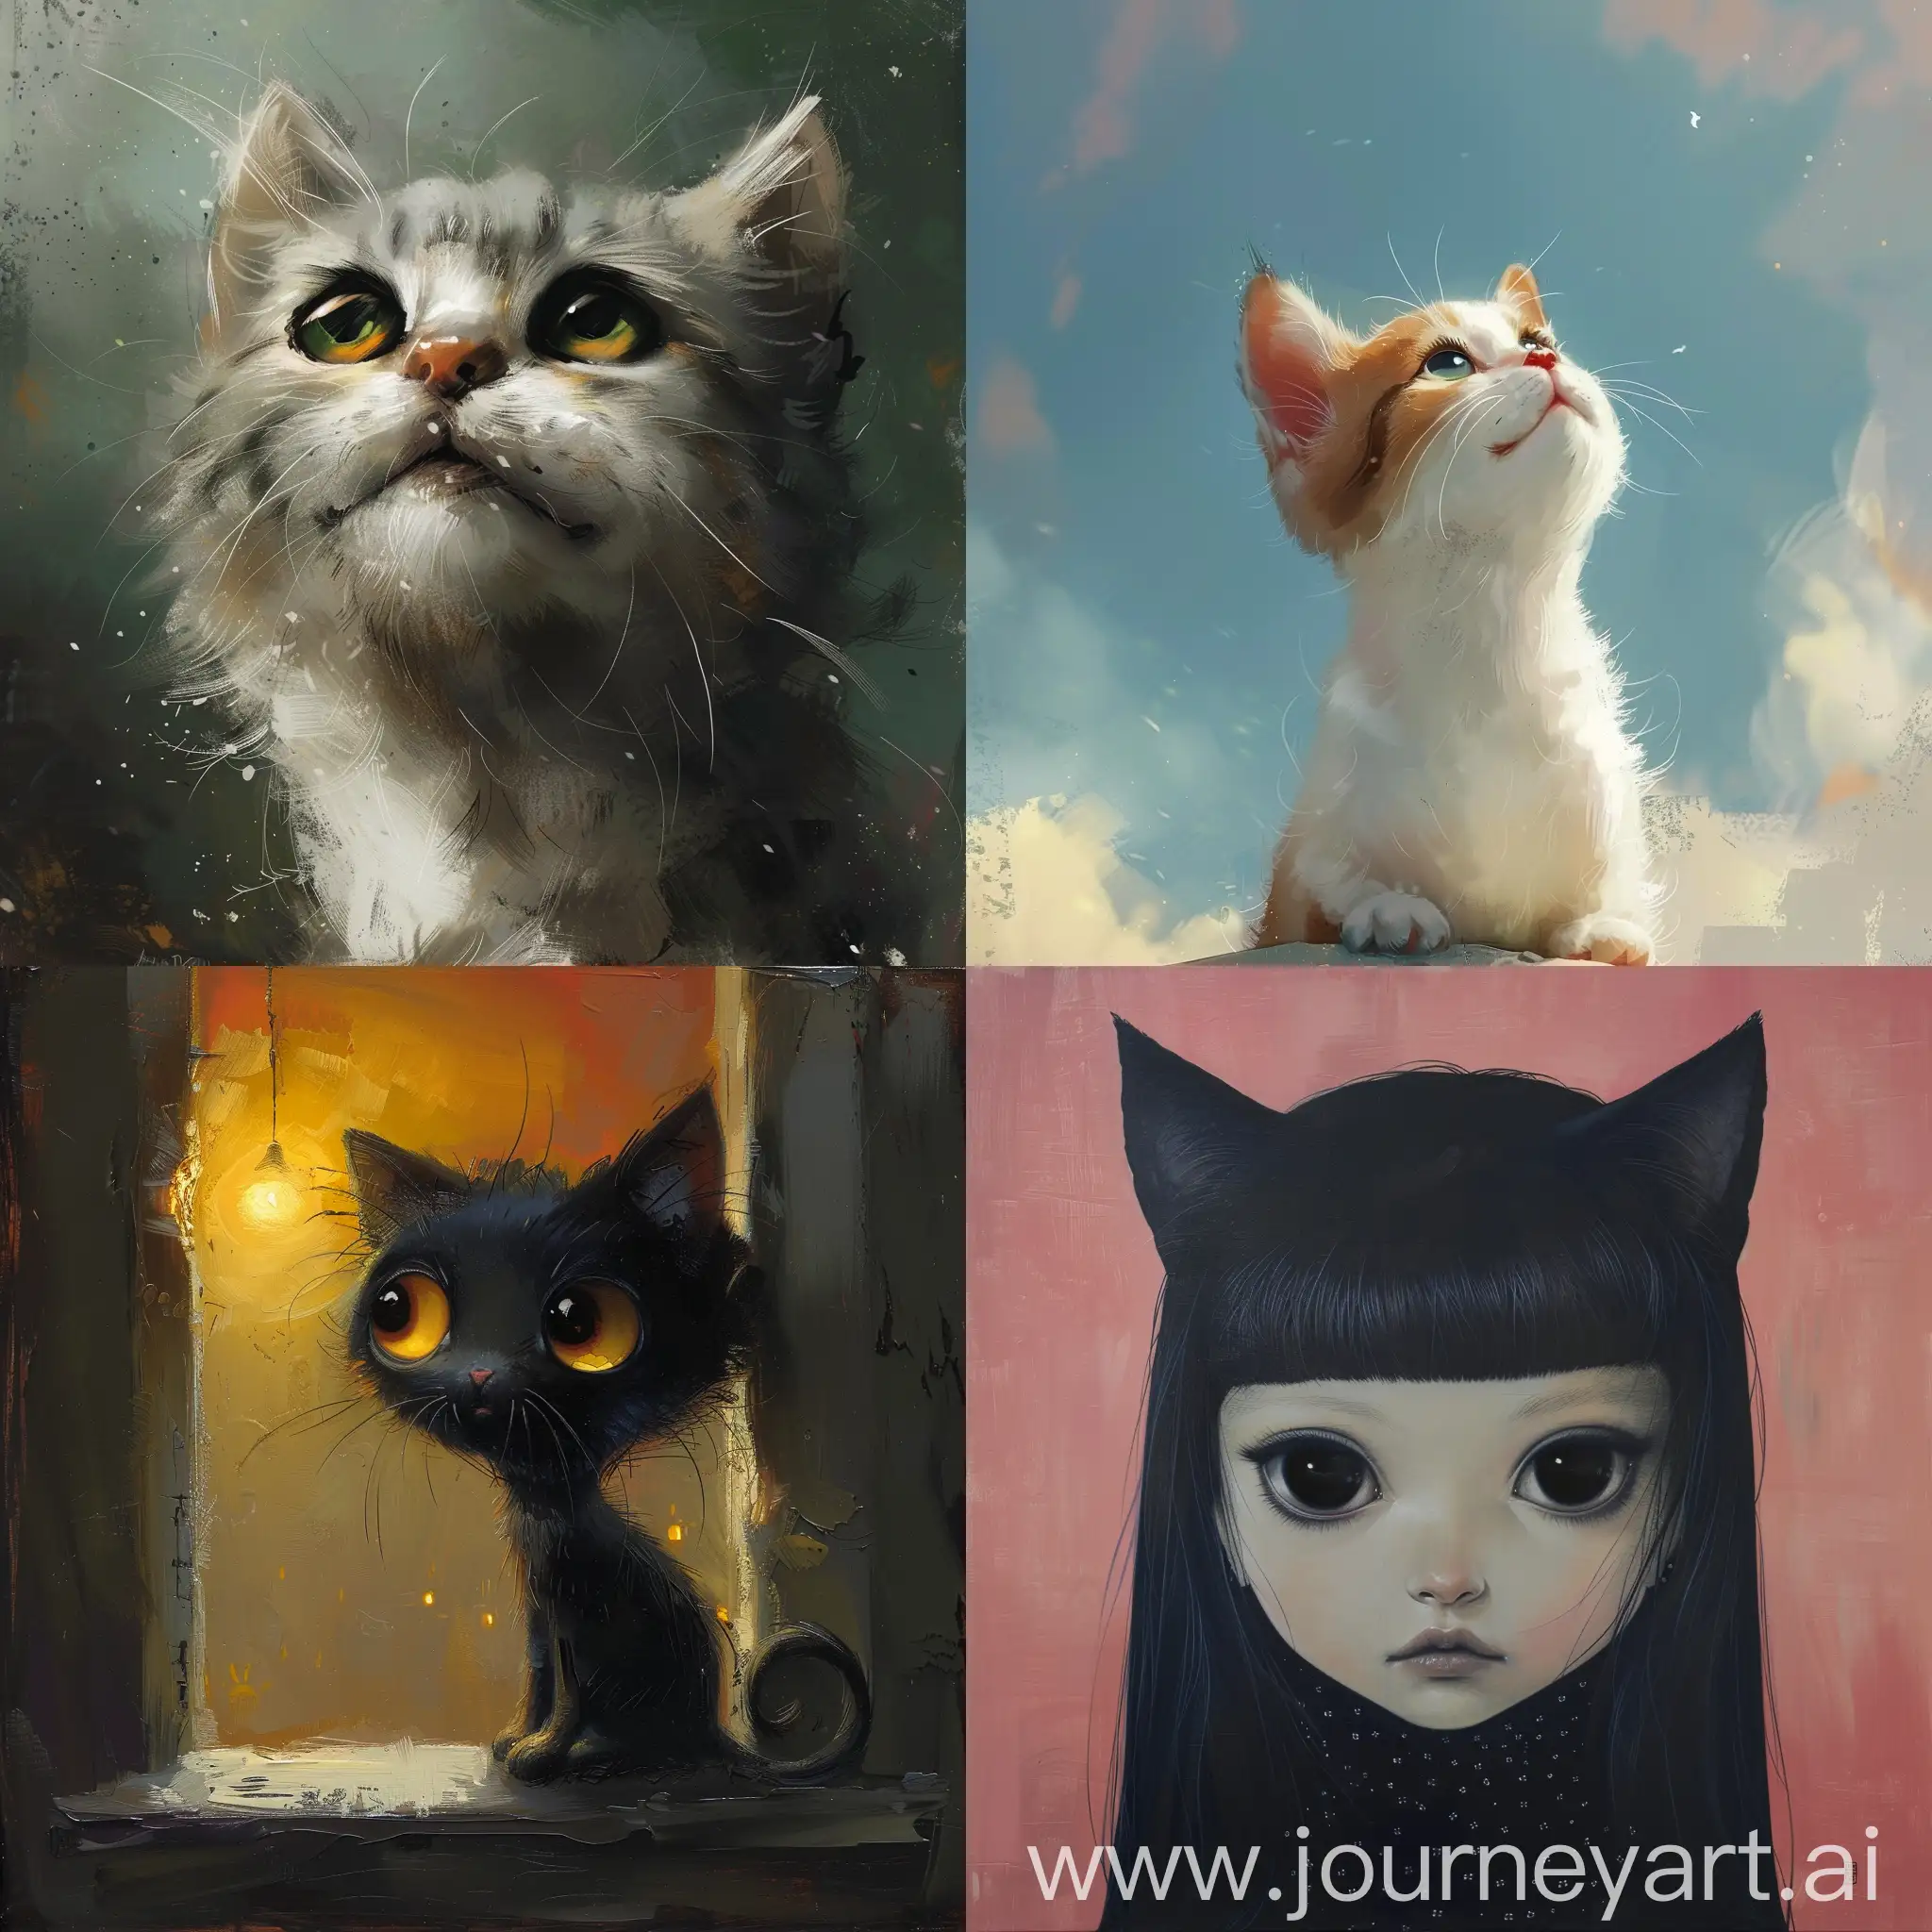 Funny cat::character concept art by Lois van Baarle and William-Adolphe Bouguereau and ghibli studio::sad
